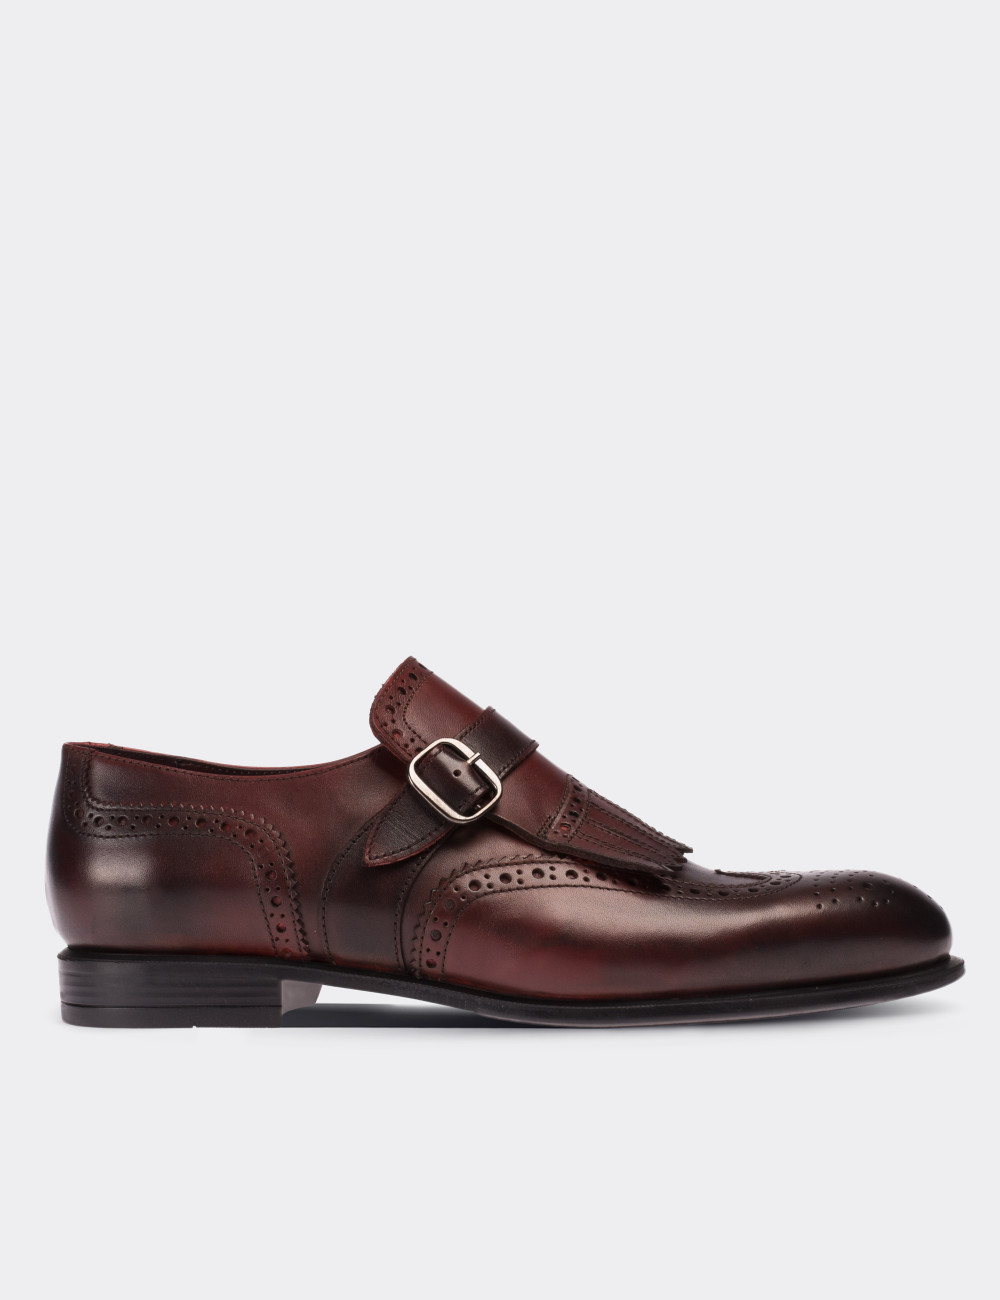 Burgundy  Leather Monk Straps Shoes - 01680MBRDC01